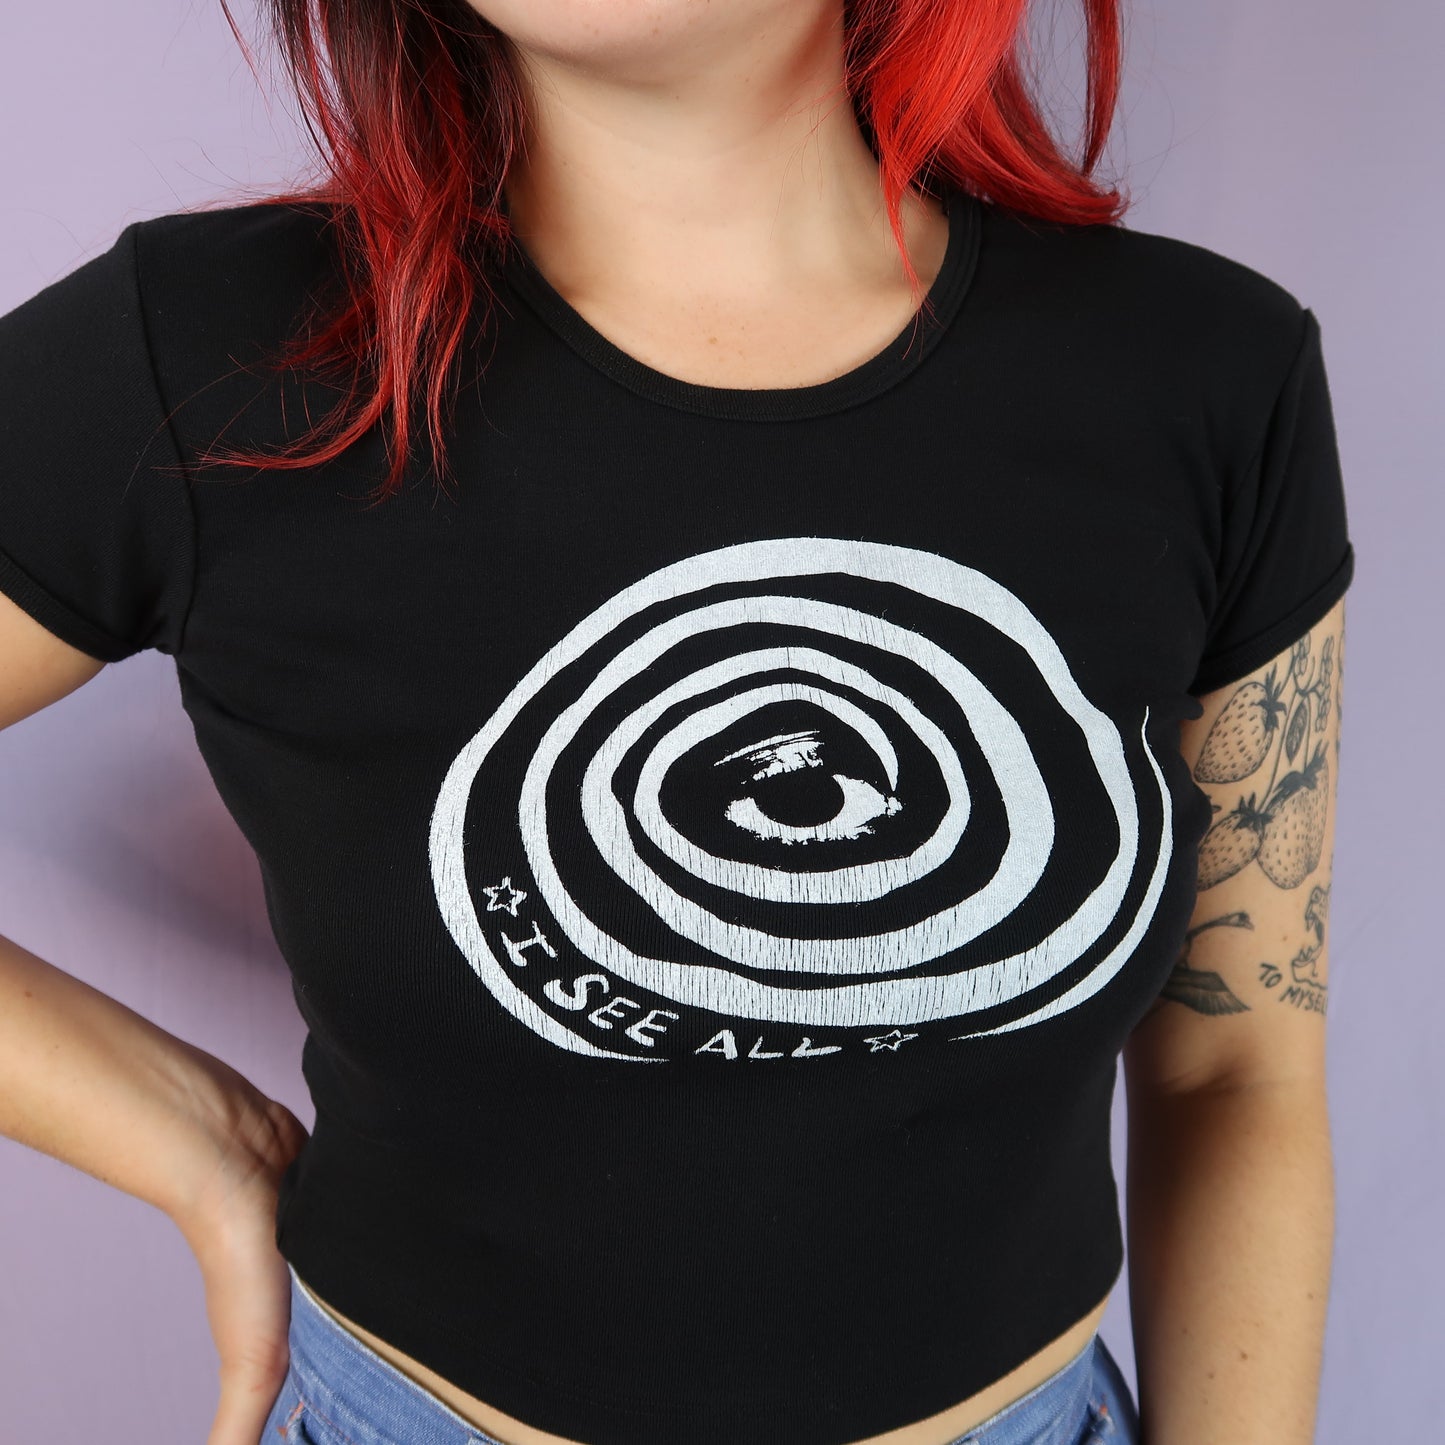 "I See All" (Eye Spiral) Crop Top in Black - Small to Large